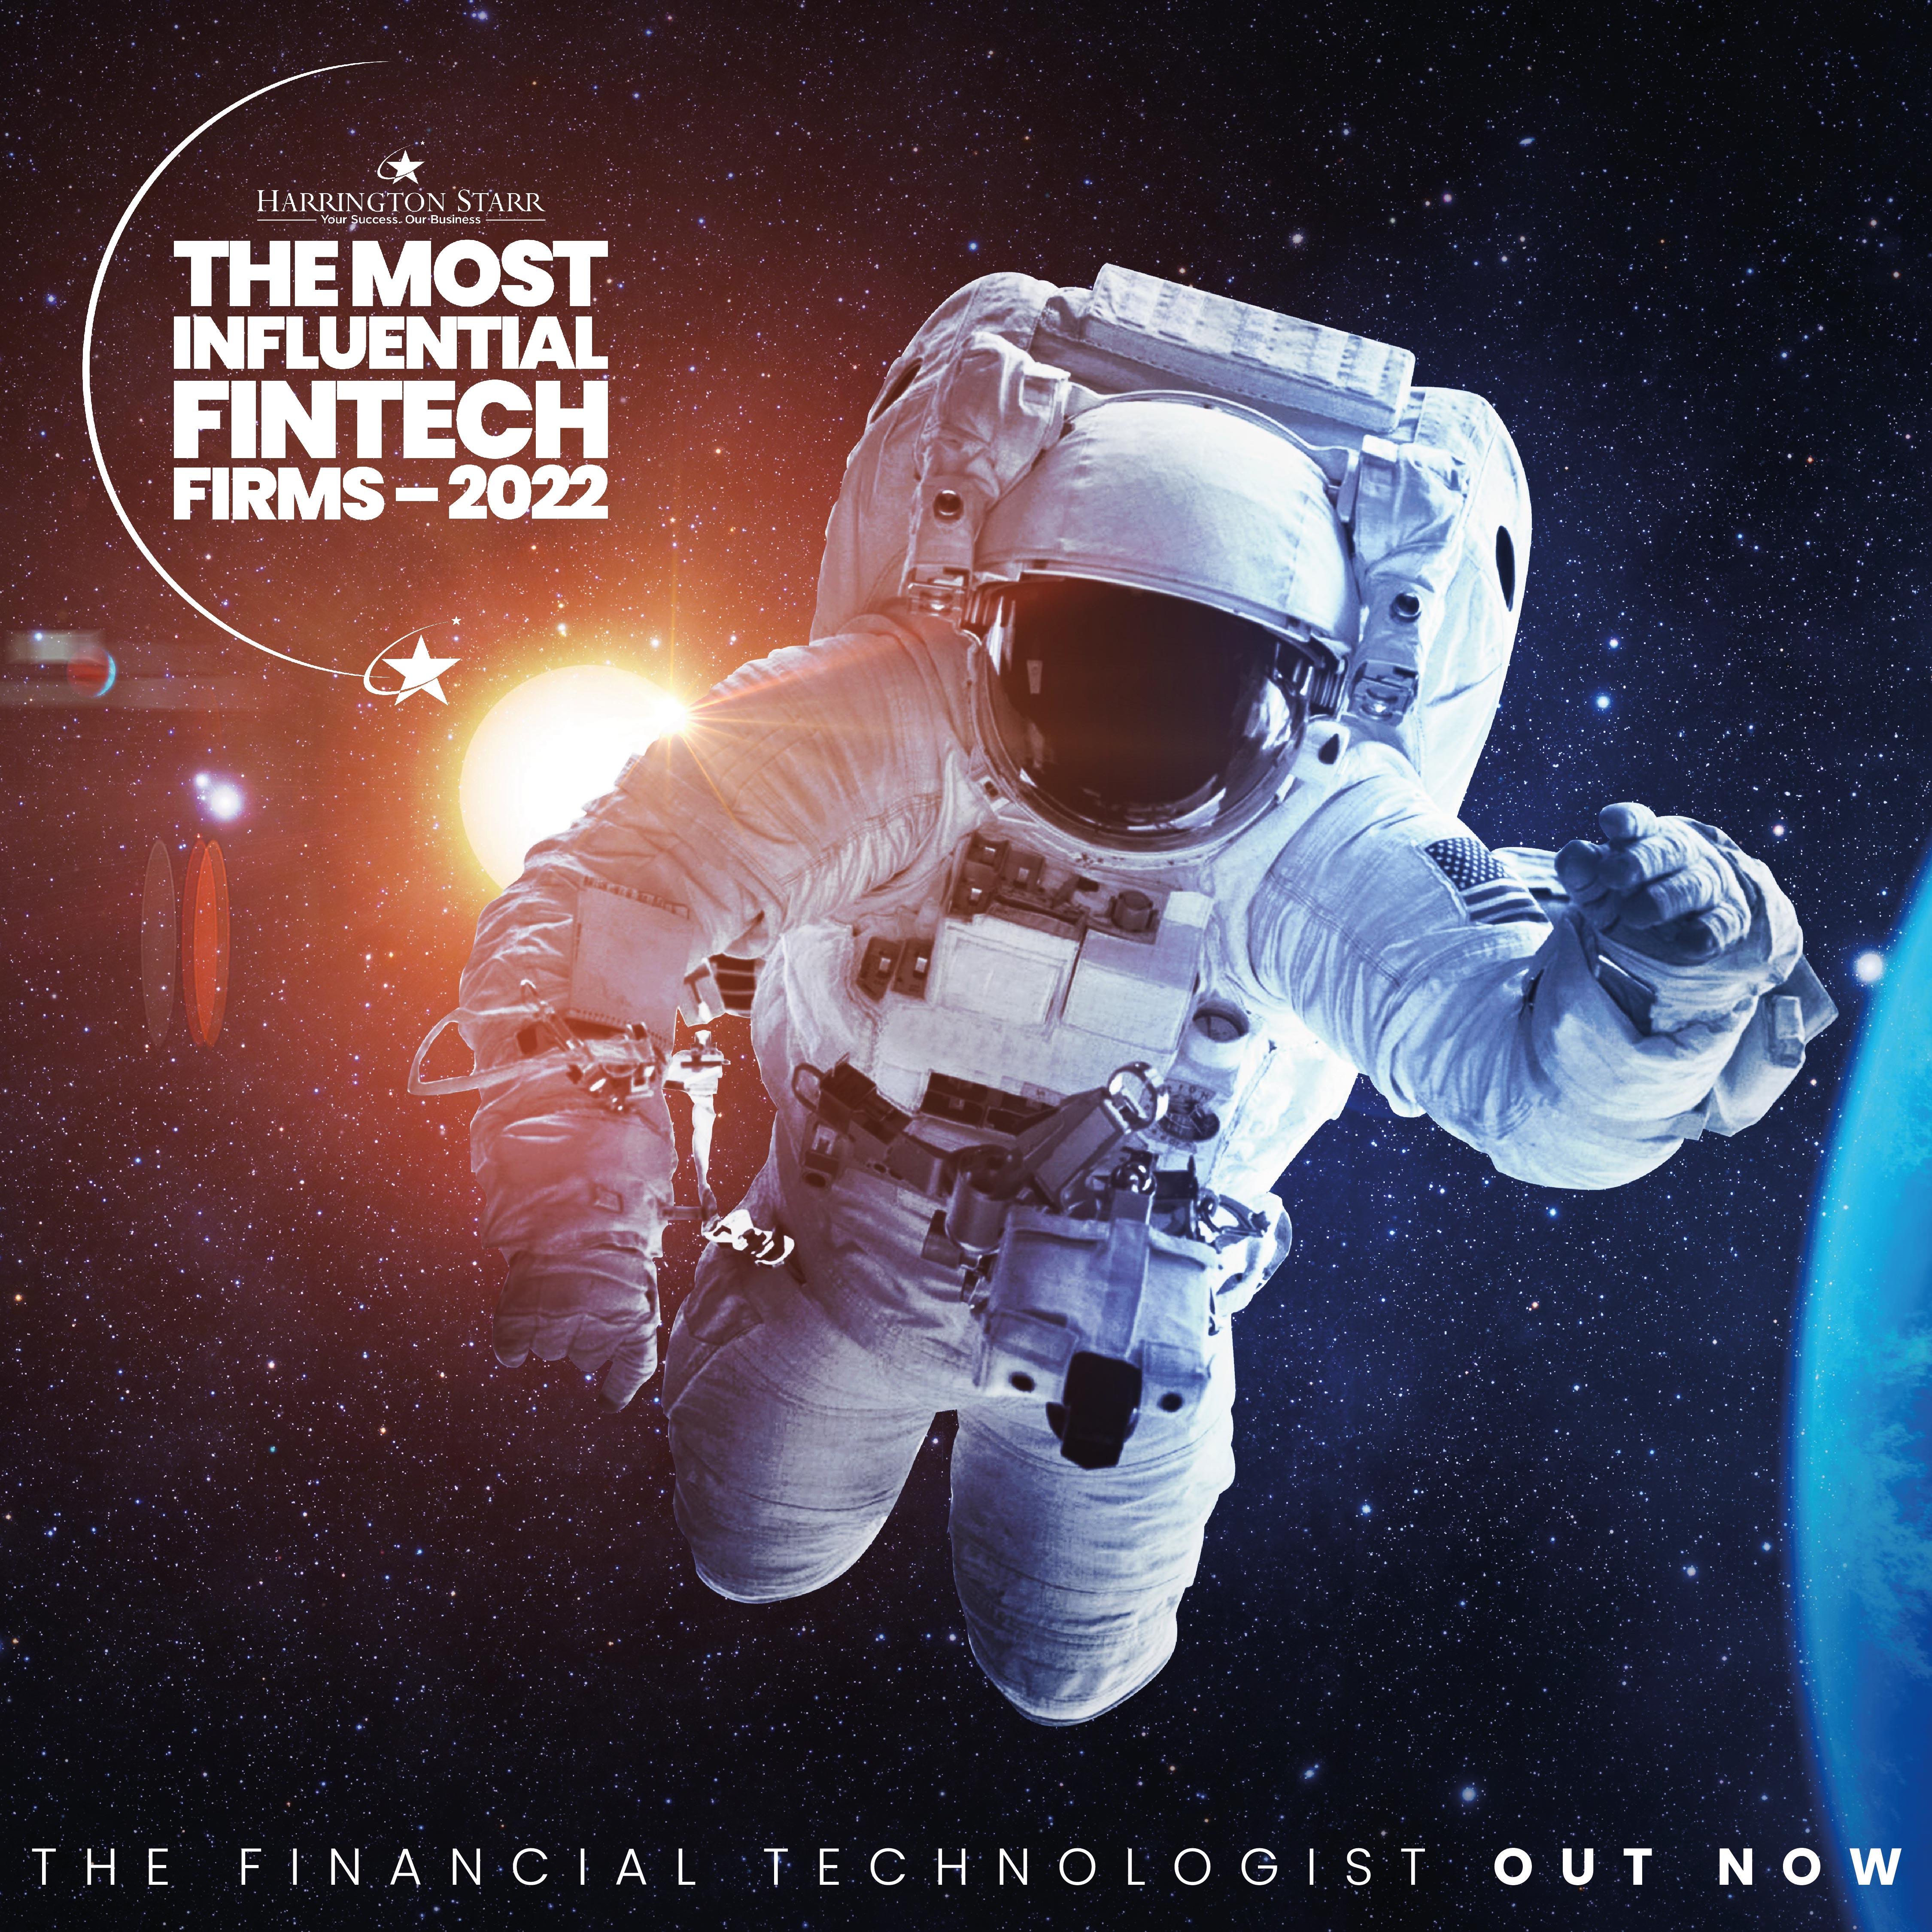 TransFICC Named One of The Most Influential FinTech Firms of 2022